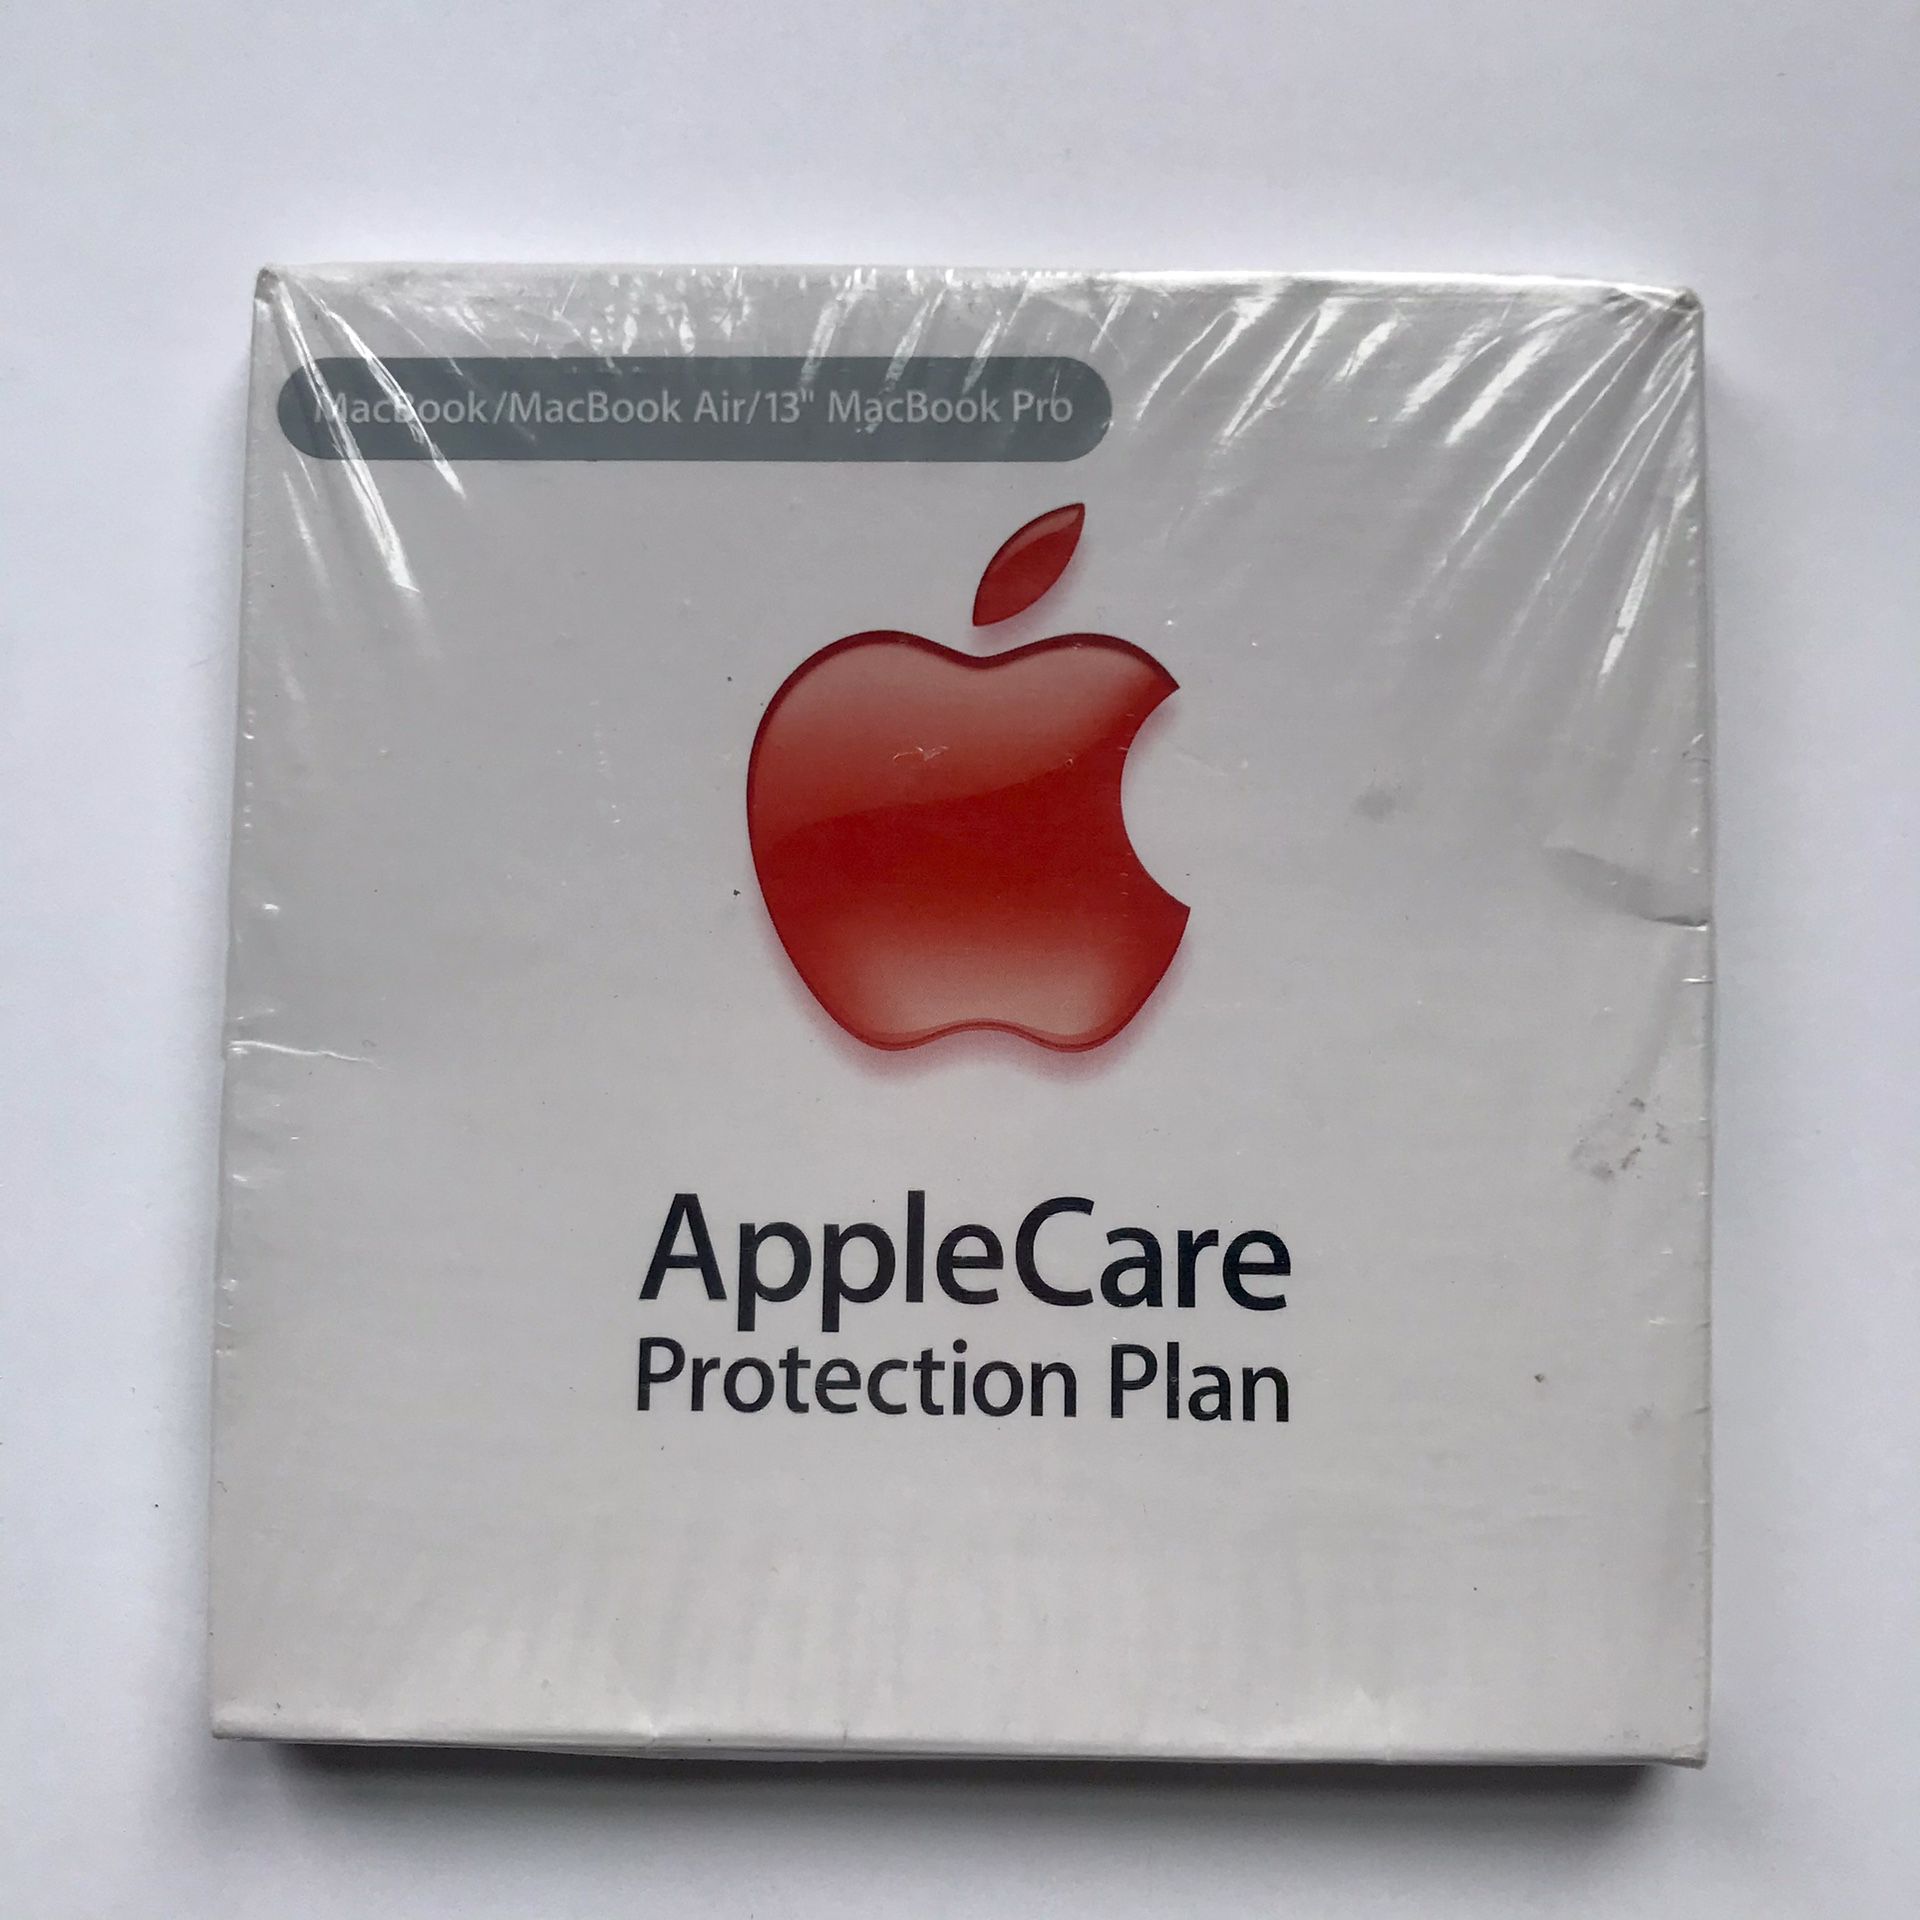 Apple . Apple Care Protection Plan. NEW. unopened save 145 authentic from Apple.